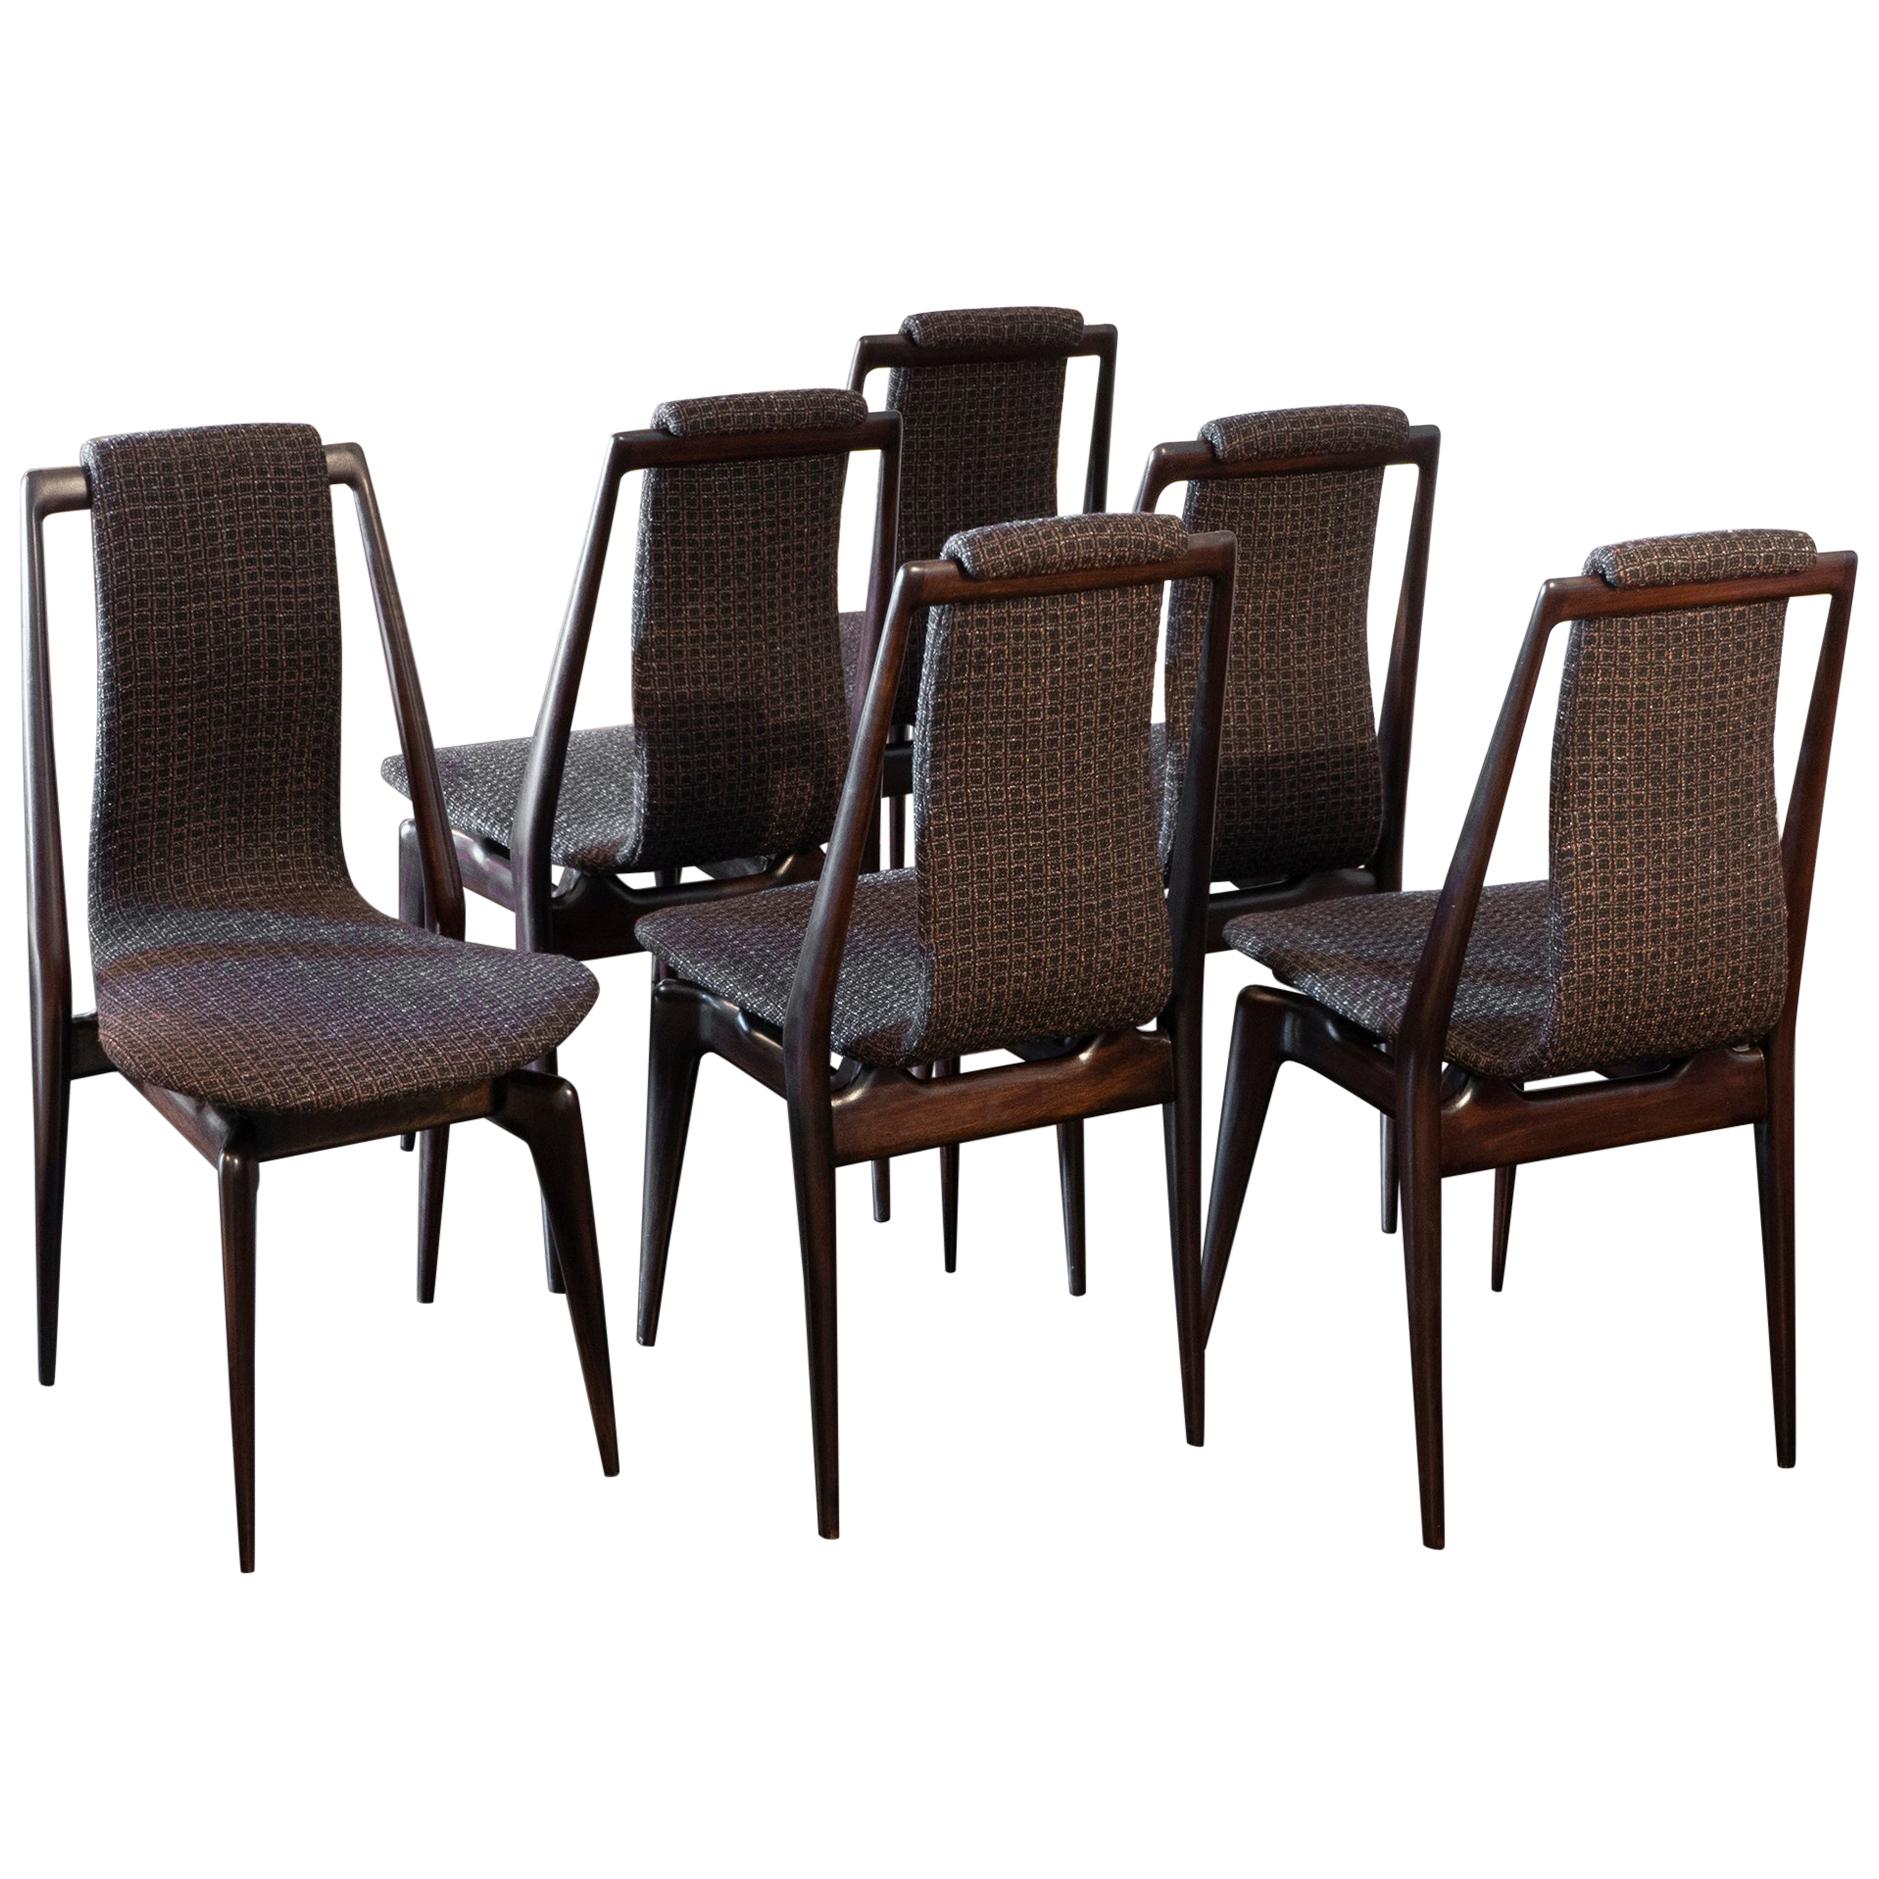 Set of Six Mahogany Dining Chairs, Black/Brown Jacquard Fabric, Italy, 1950s